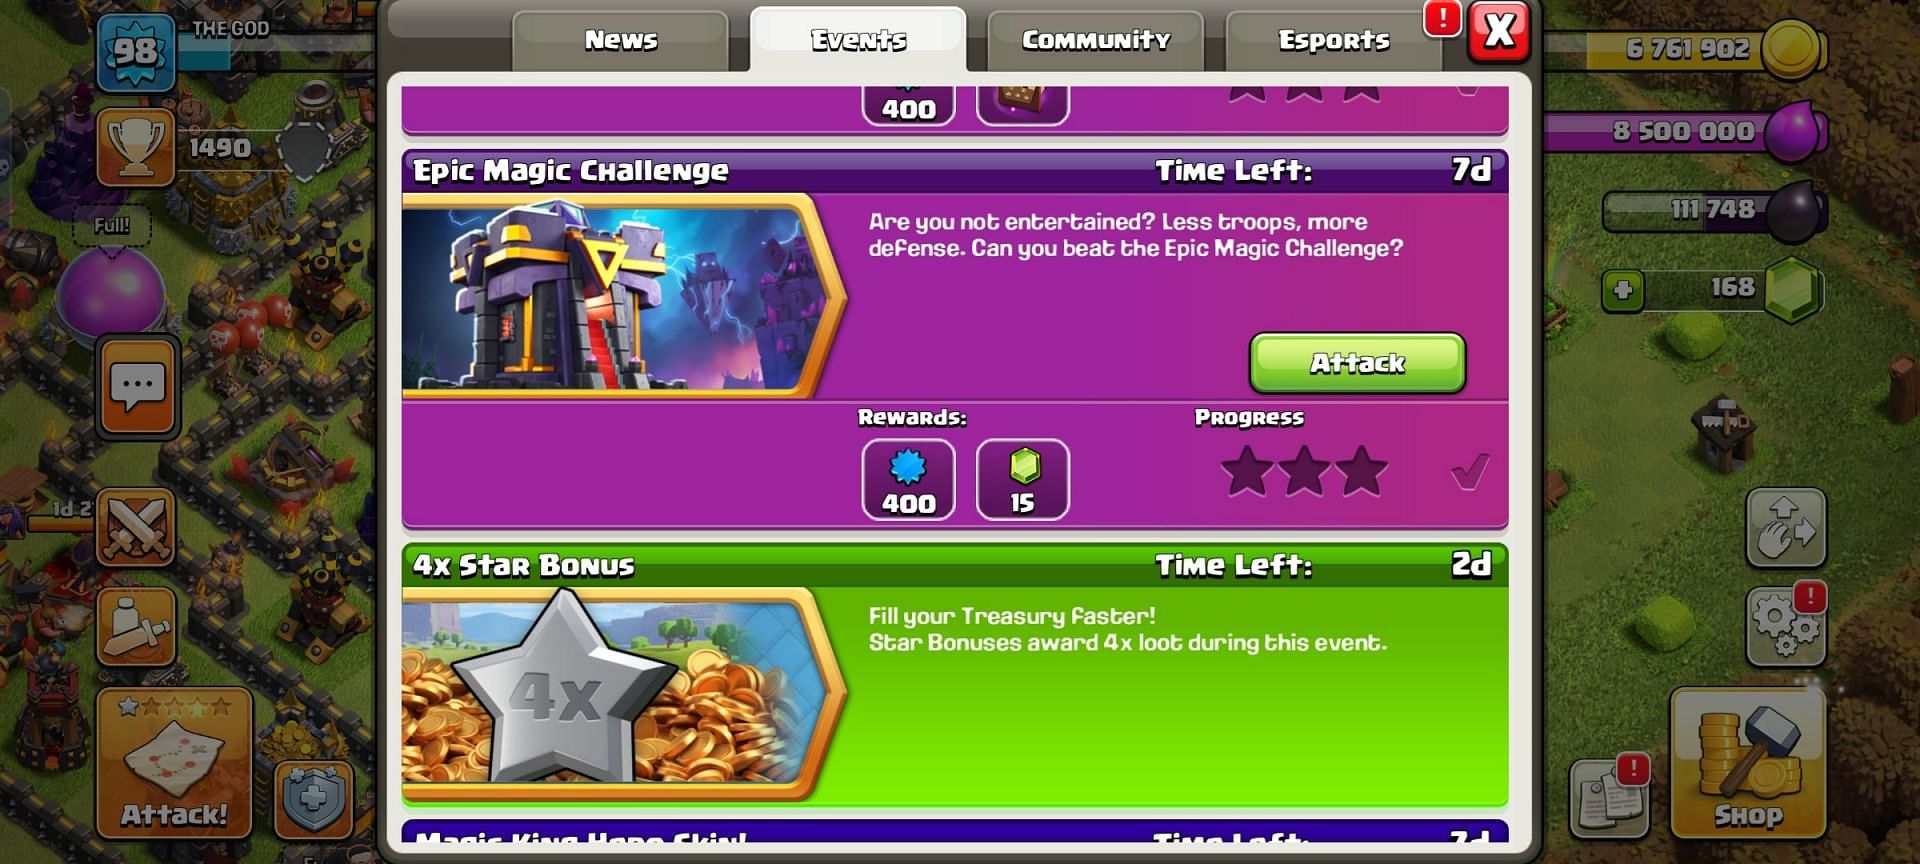 Events are added quite frequently (Image via Supercell)